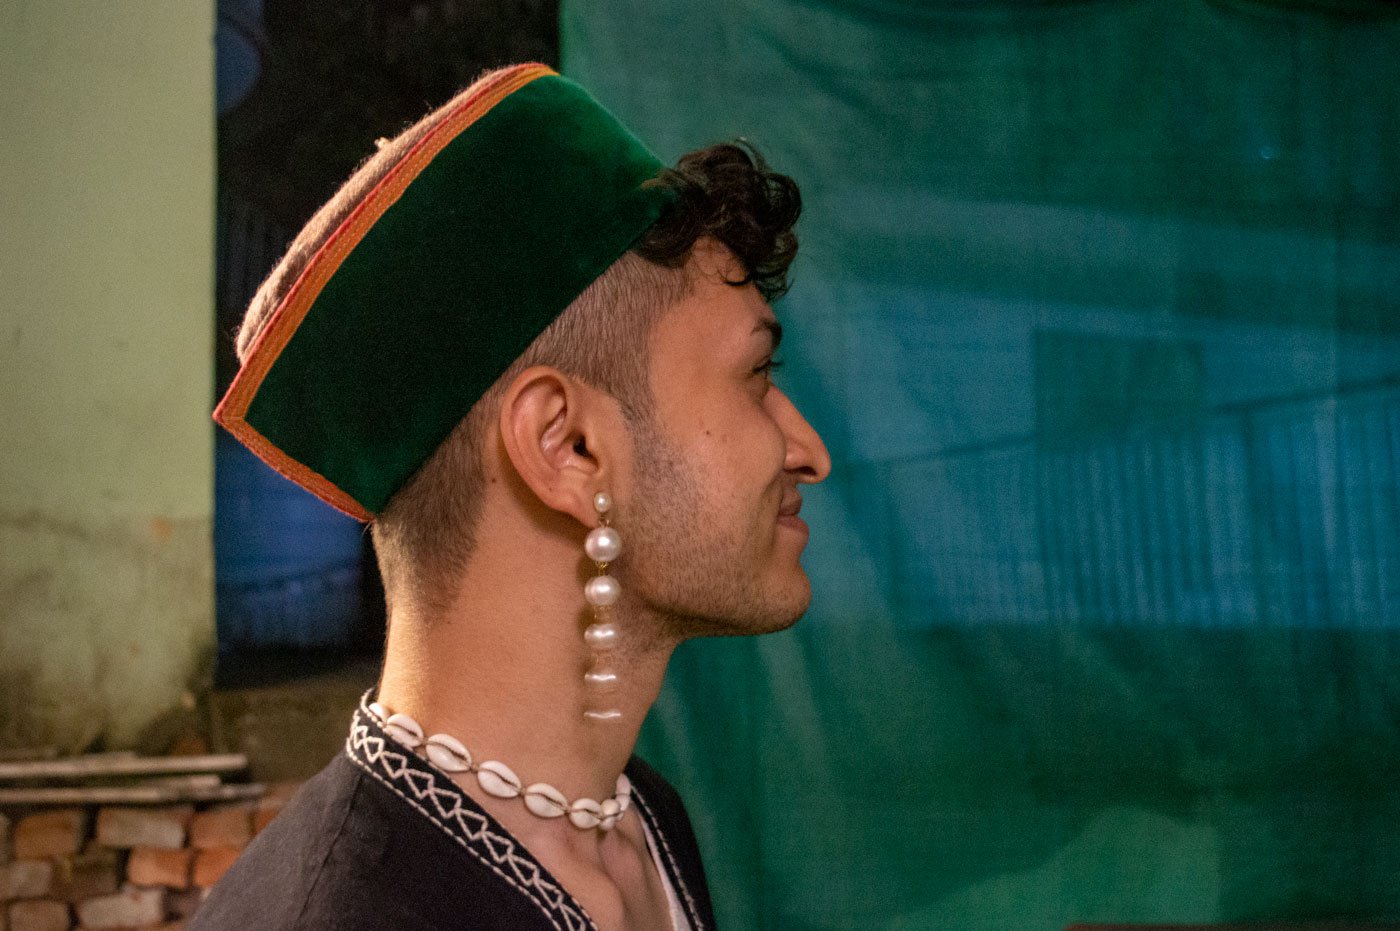 Ayush is a 20-year-old student from Shimla. They say, ' No one talks about this [being queer] here [in Himachal Pradesh]'